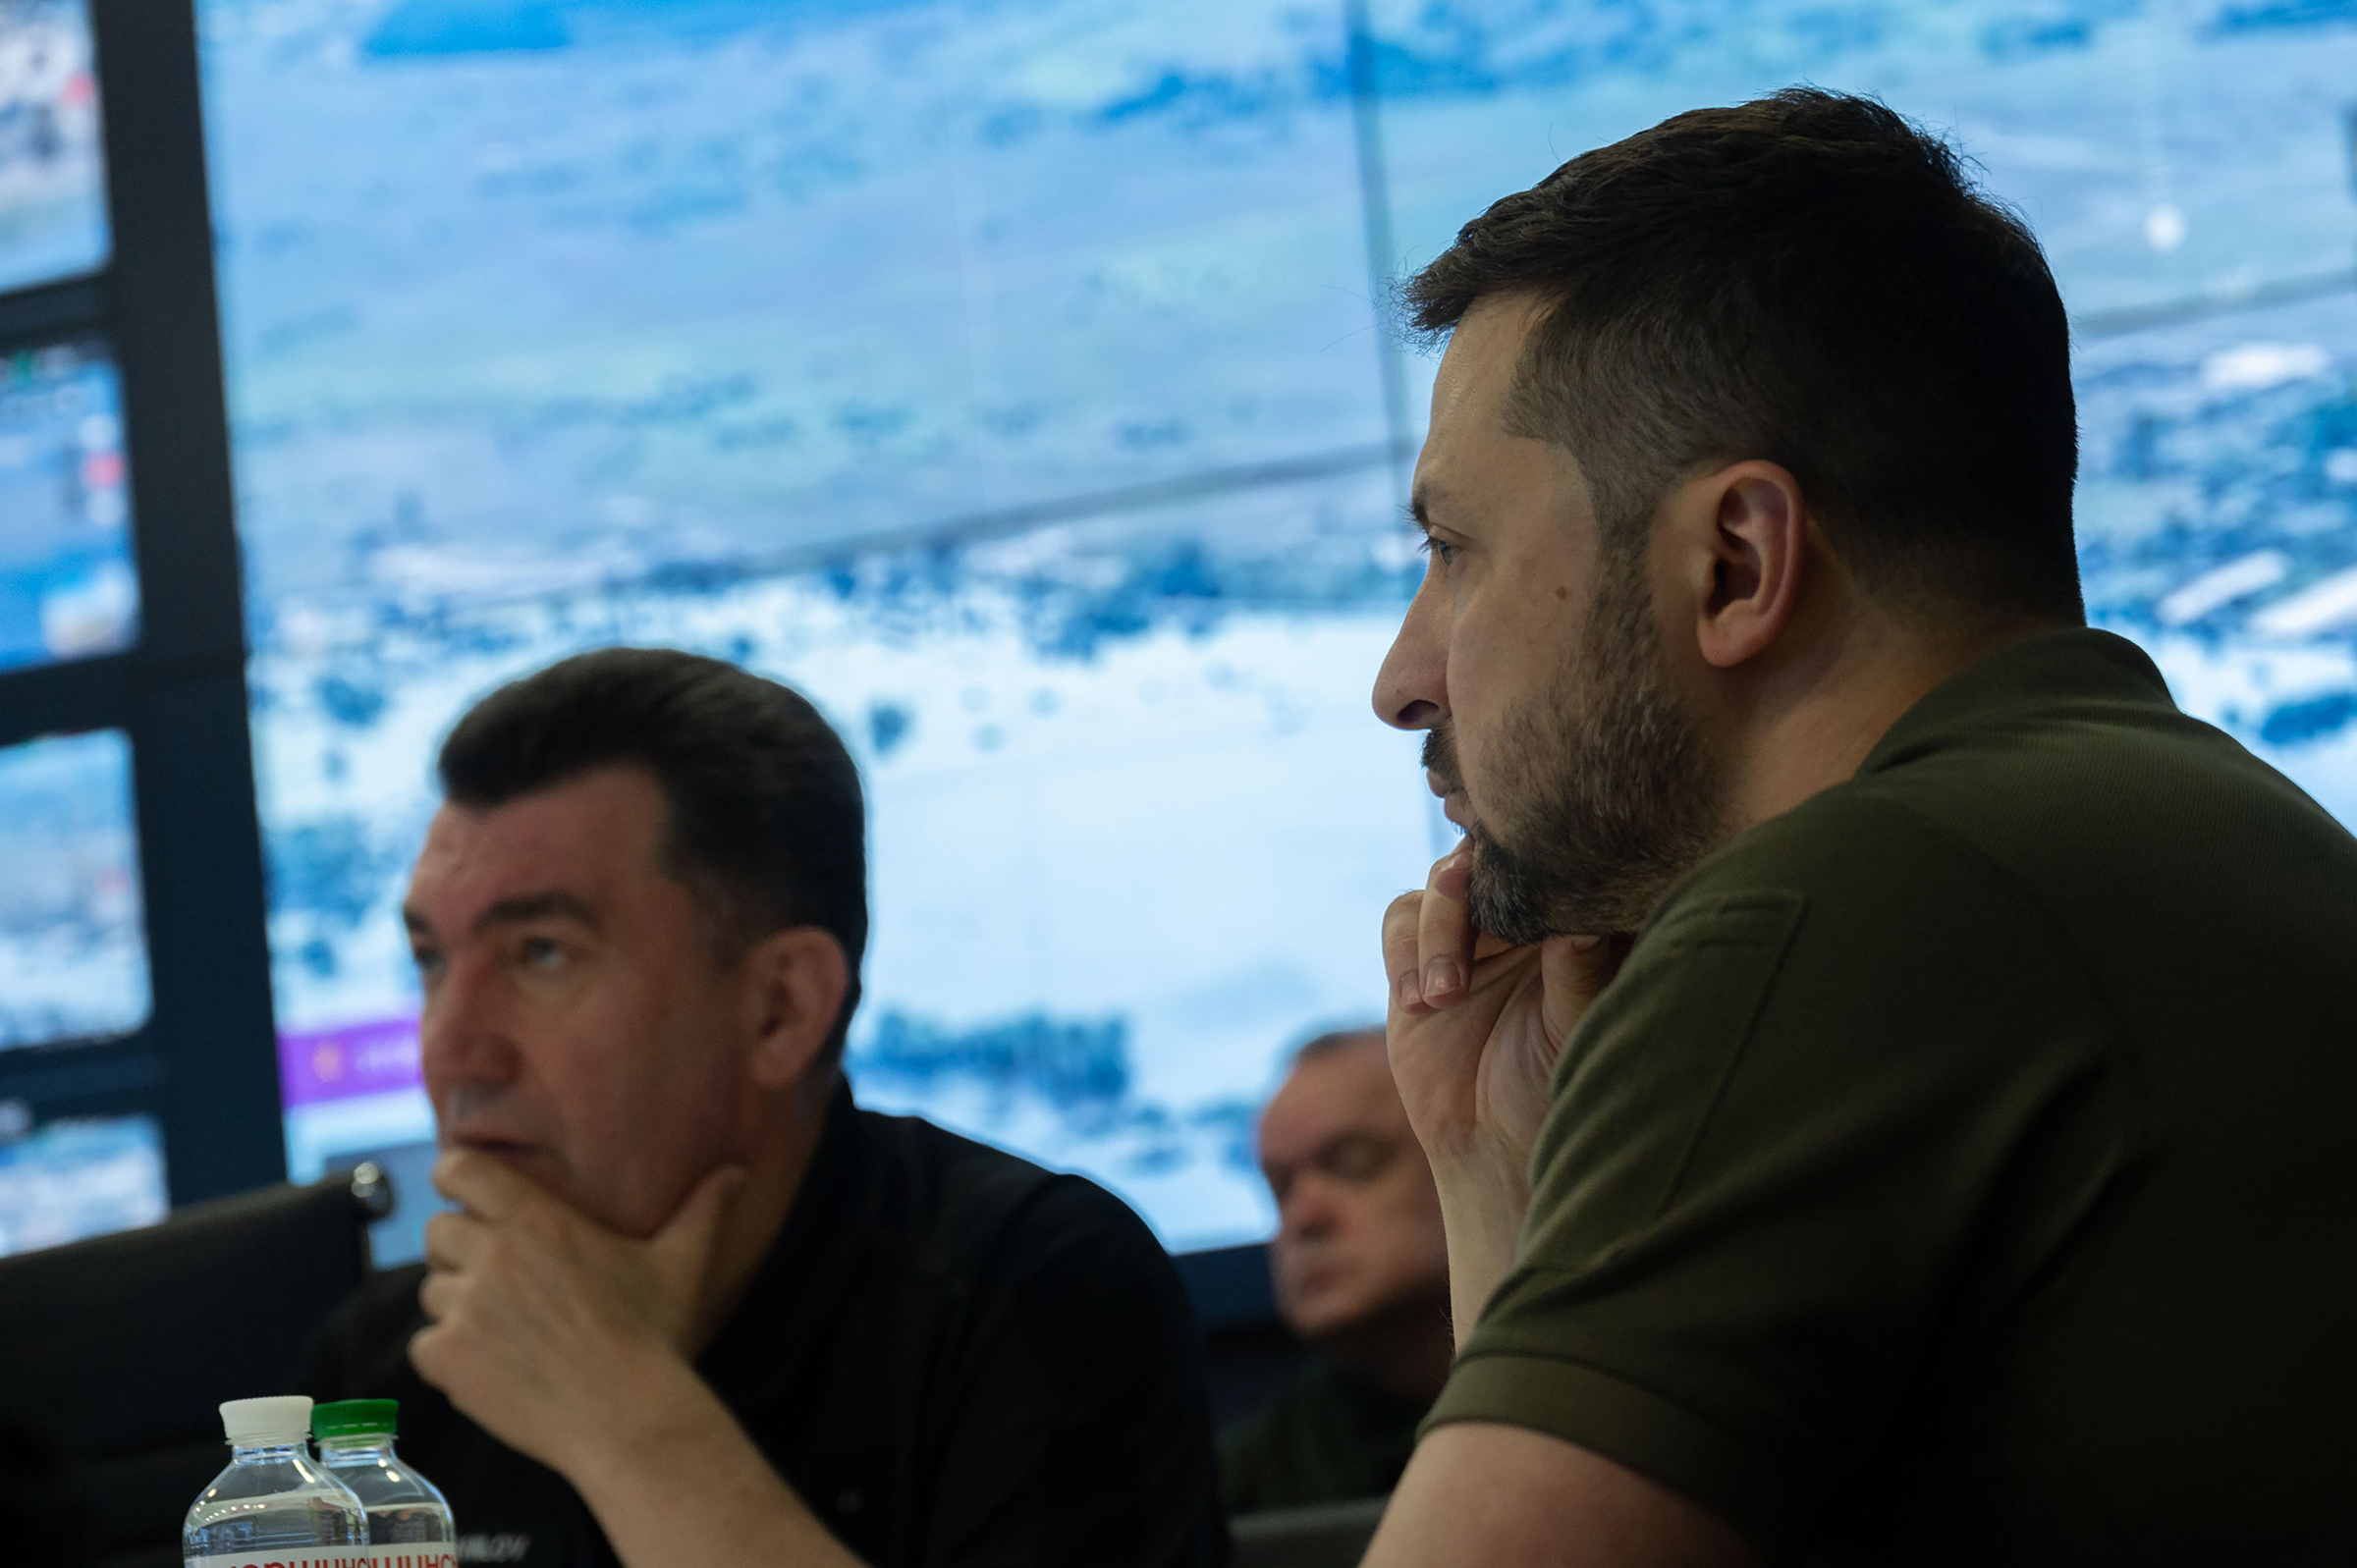 Ukrainian President Volodymyr Zelensky (R) holds an emergency meeting of the National Security and Defense Council on the situation at the Kakhovka after the dam blast overnight, in Kyiv on June 6. (Ukrainian President Press Office/UPI/Shutterstock)